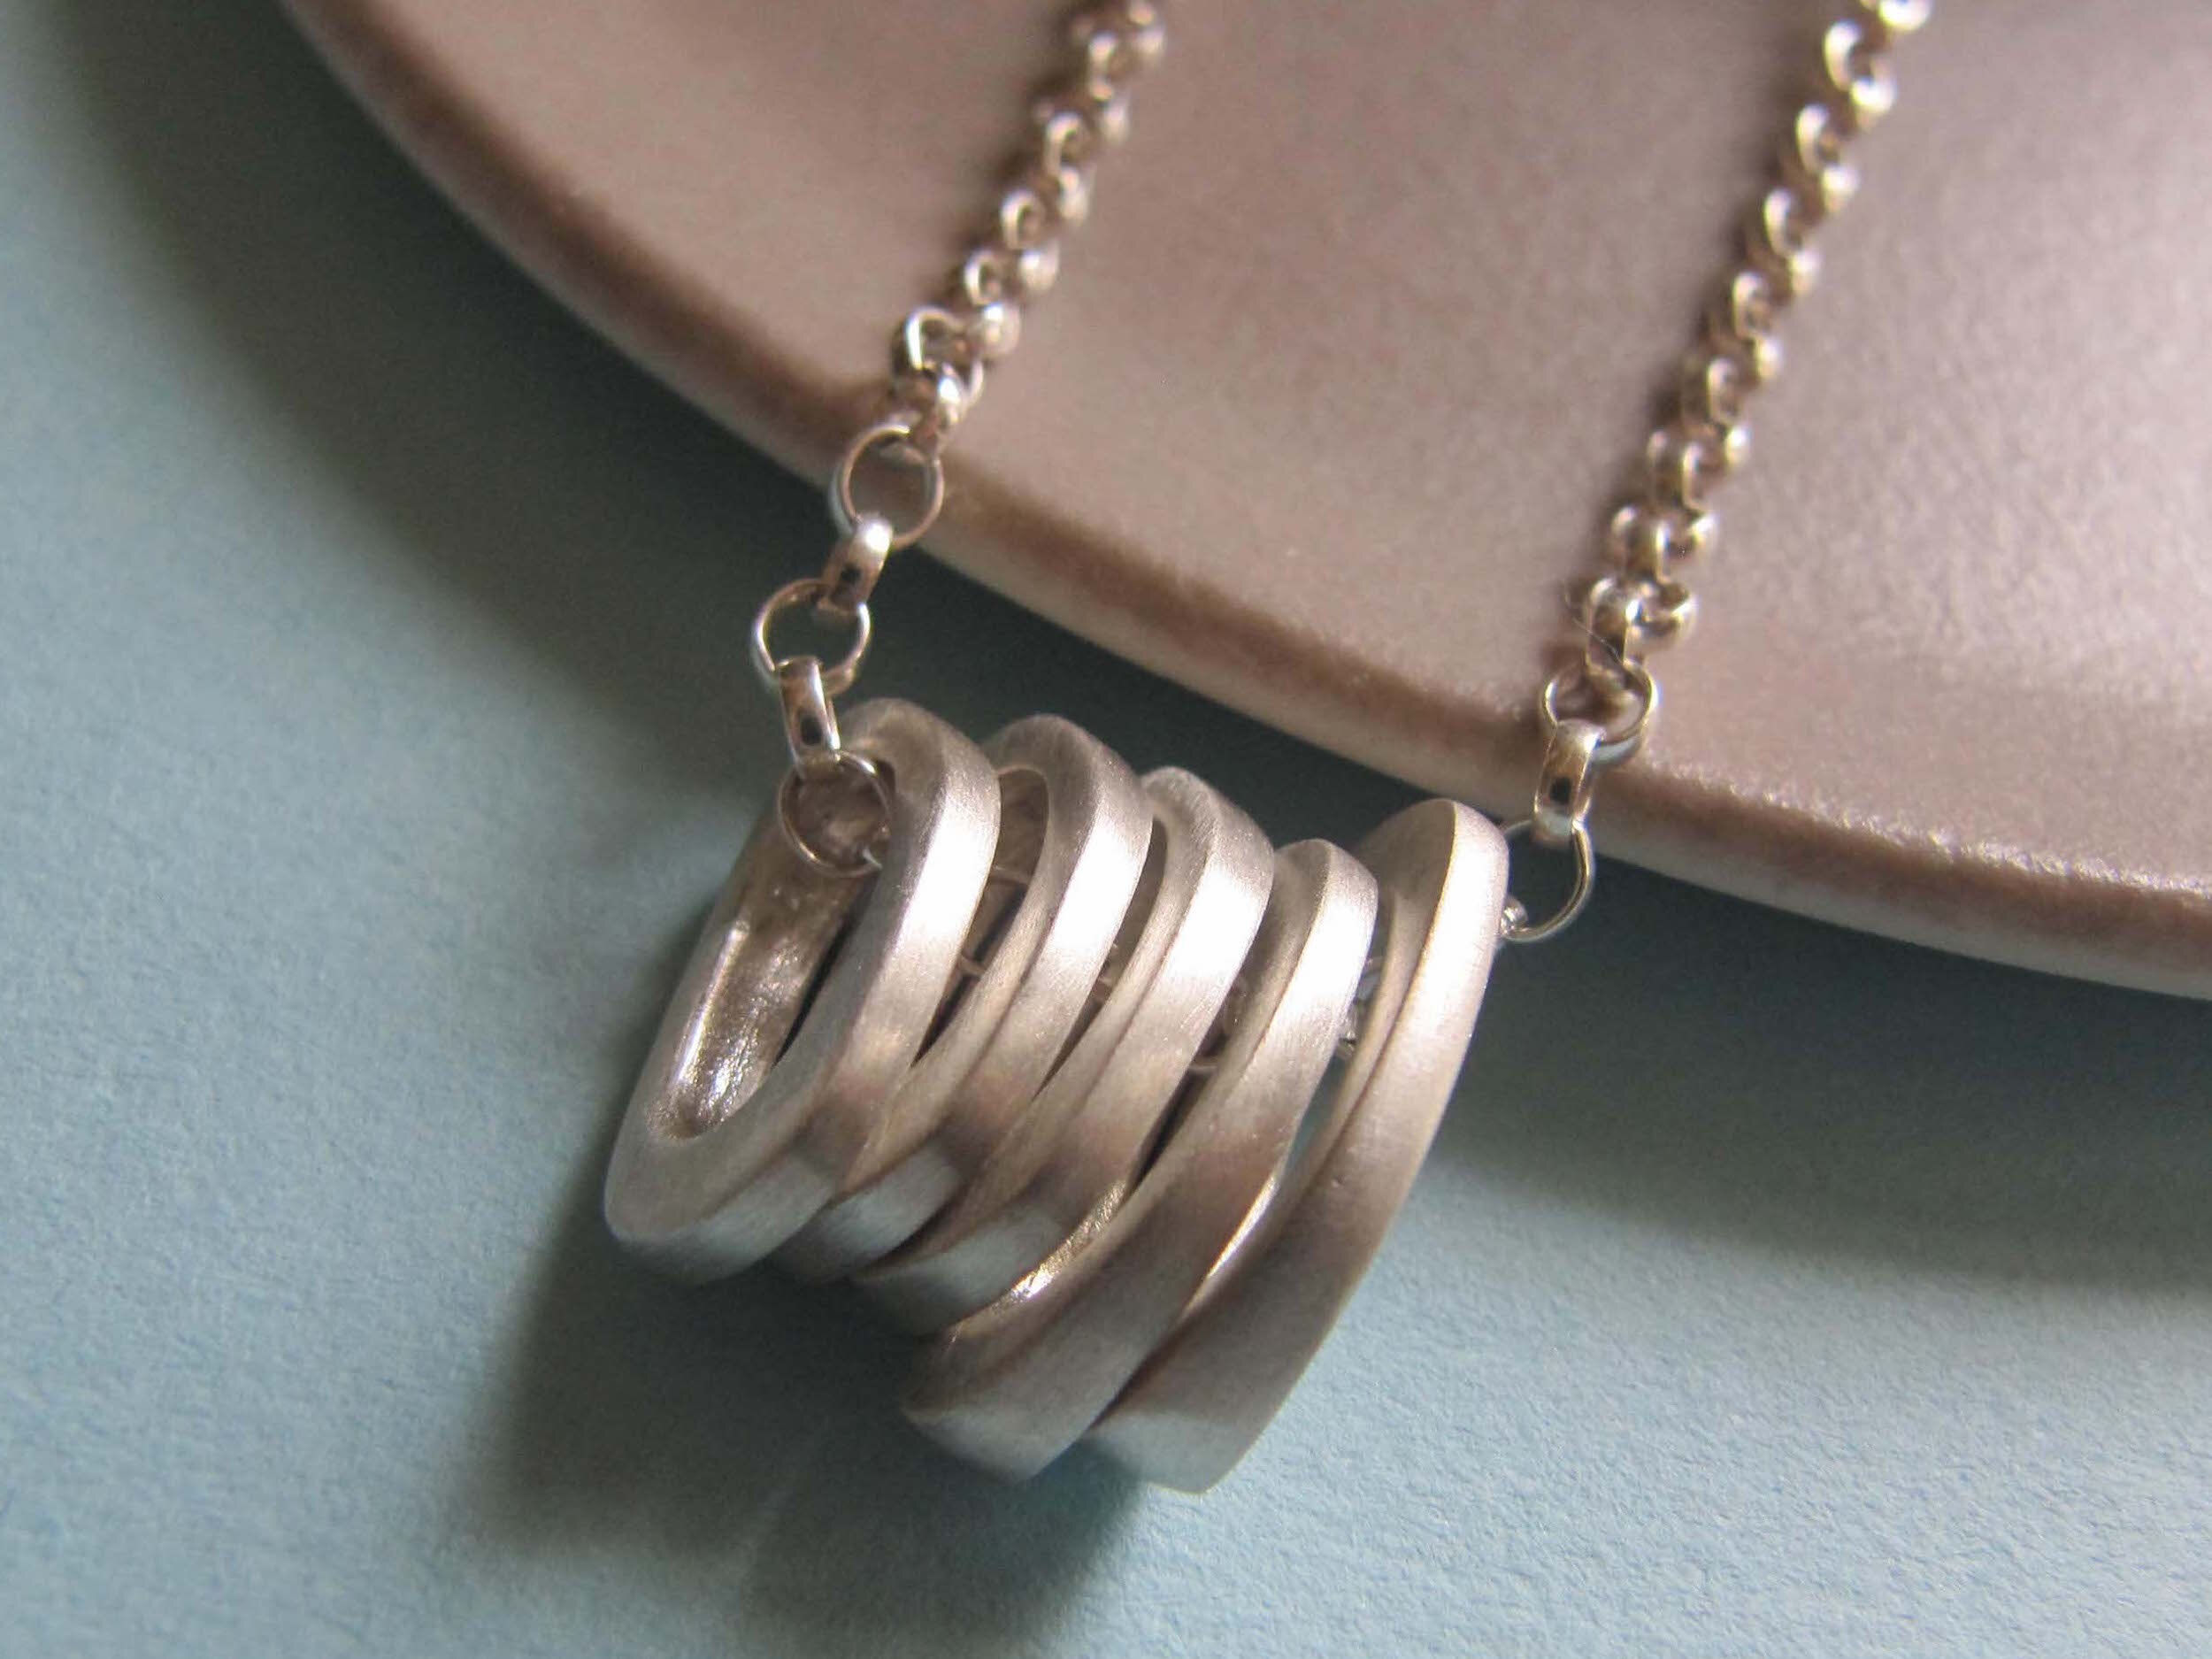  Title: Infinity Five Stacks necklace  Medium: Silver  Price: £155 